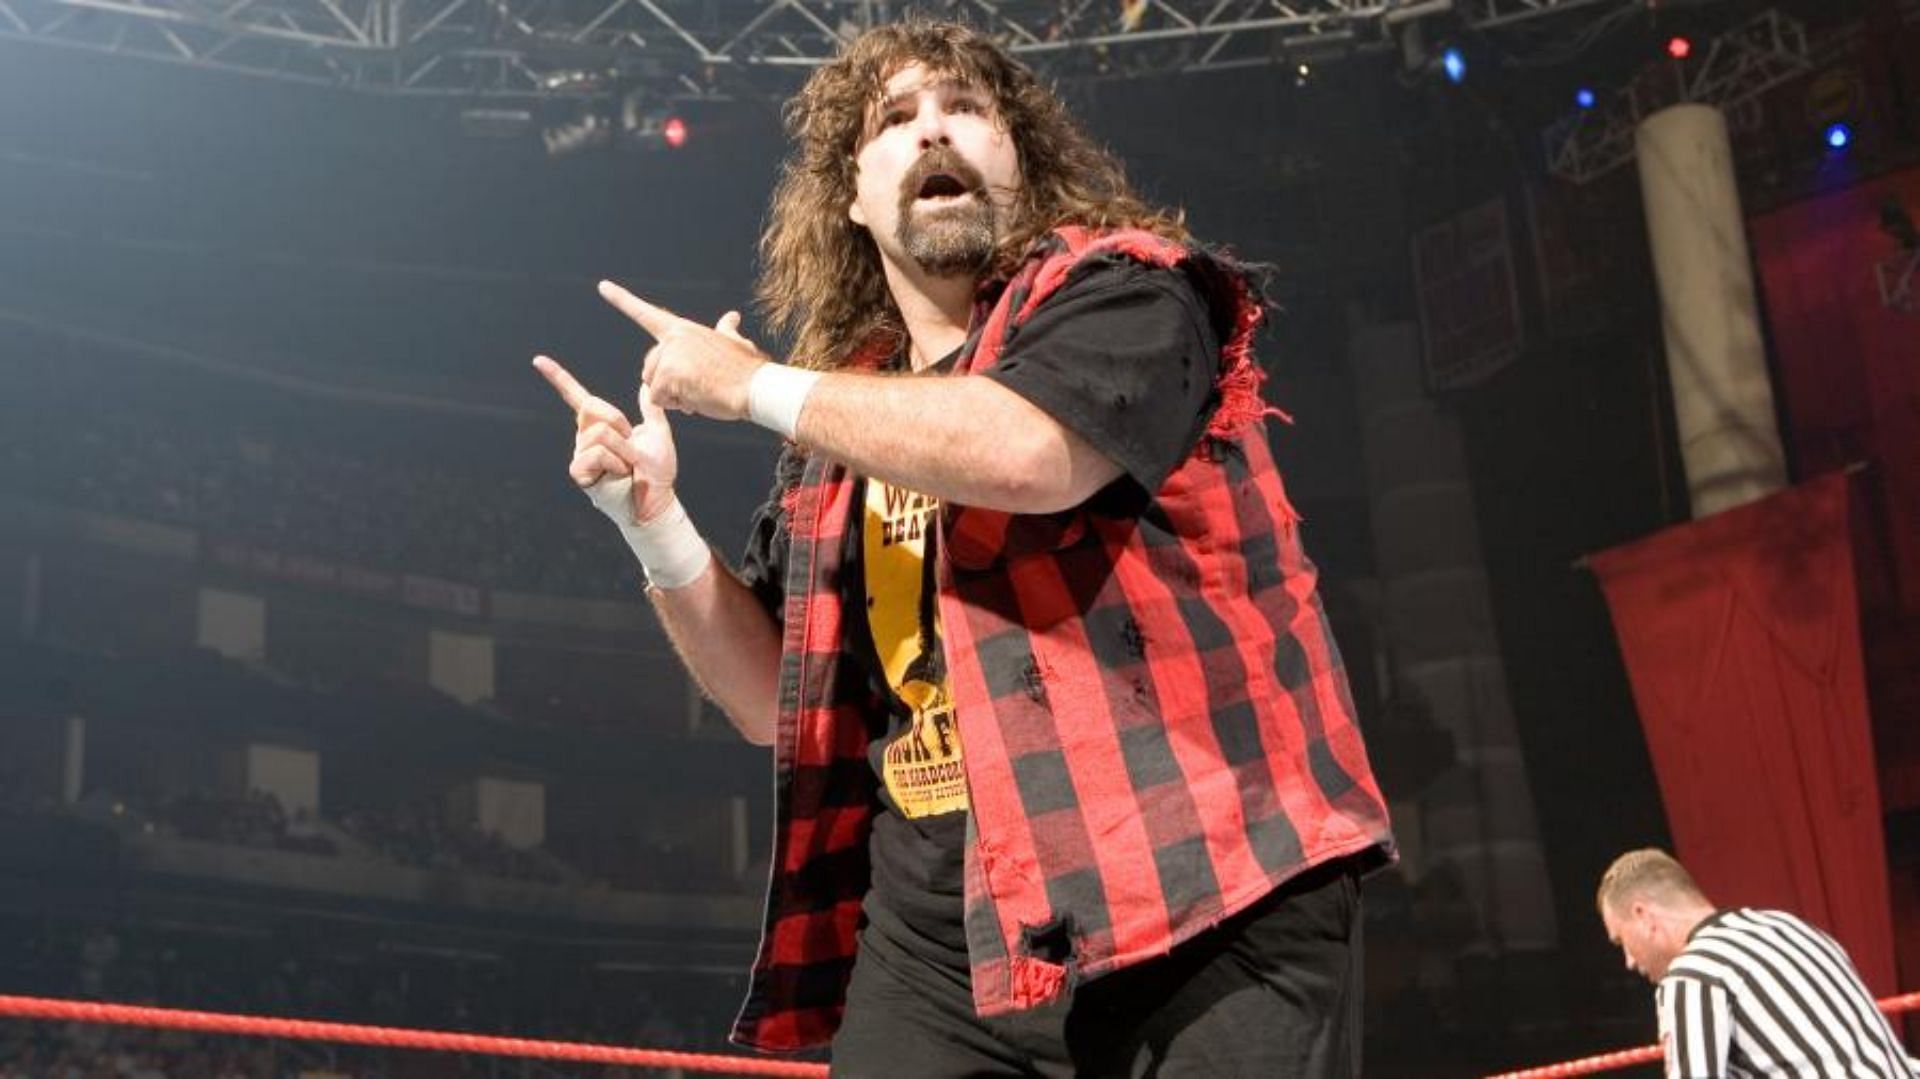 Mick Foley has shared his thoughts on RK-Bro as a tag team.